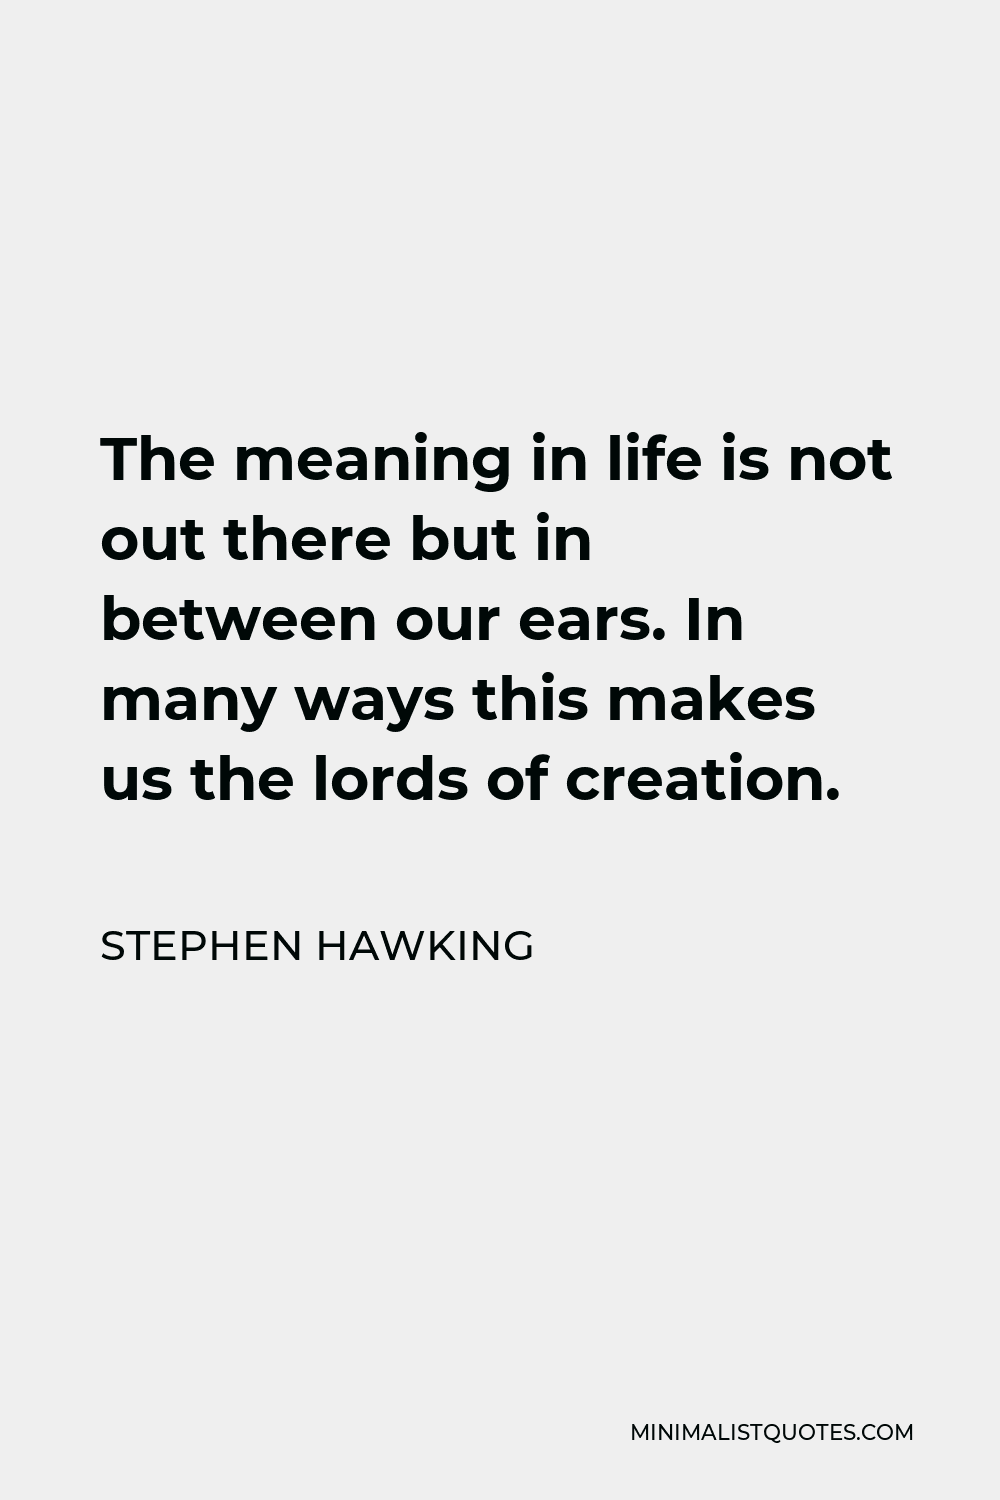 Stephen Hawking Quote - The meaning in life is not out there but in between our ears. In many ways this makes us the lords of creation.